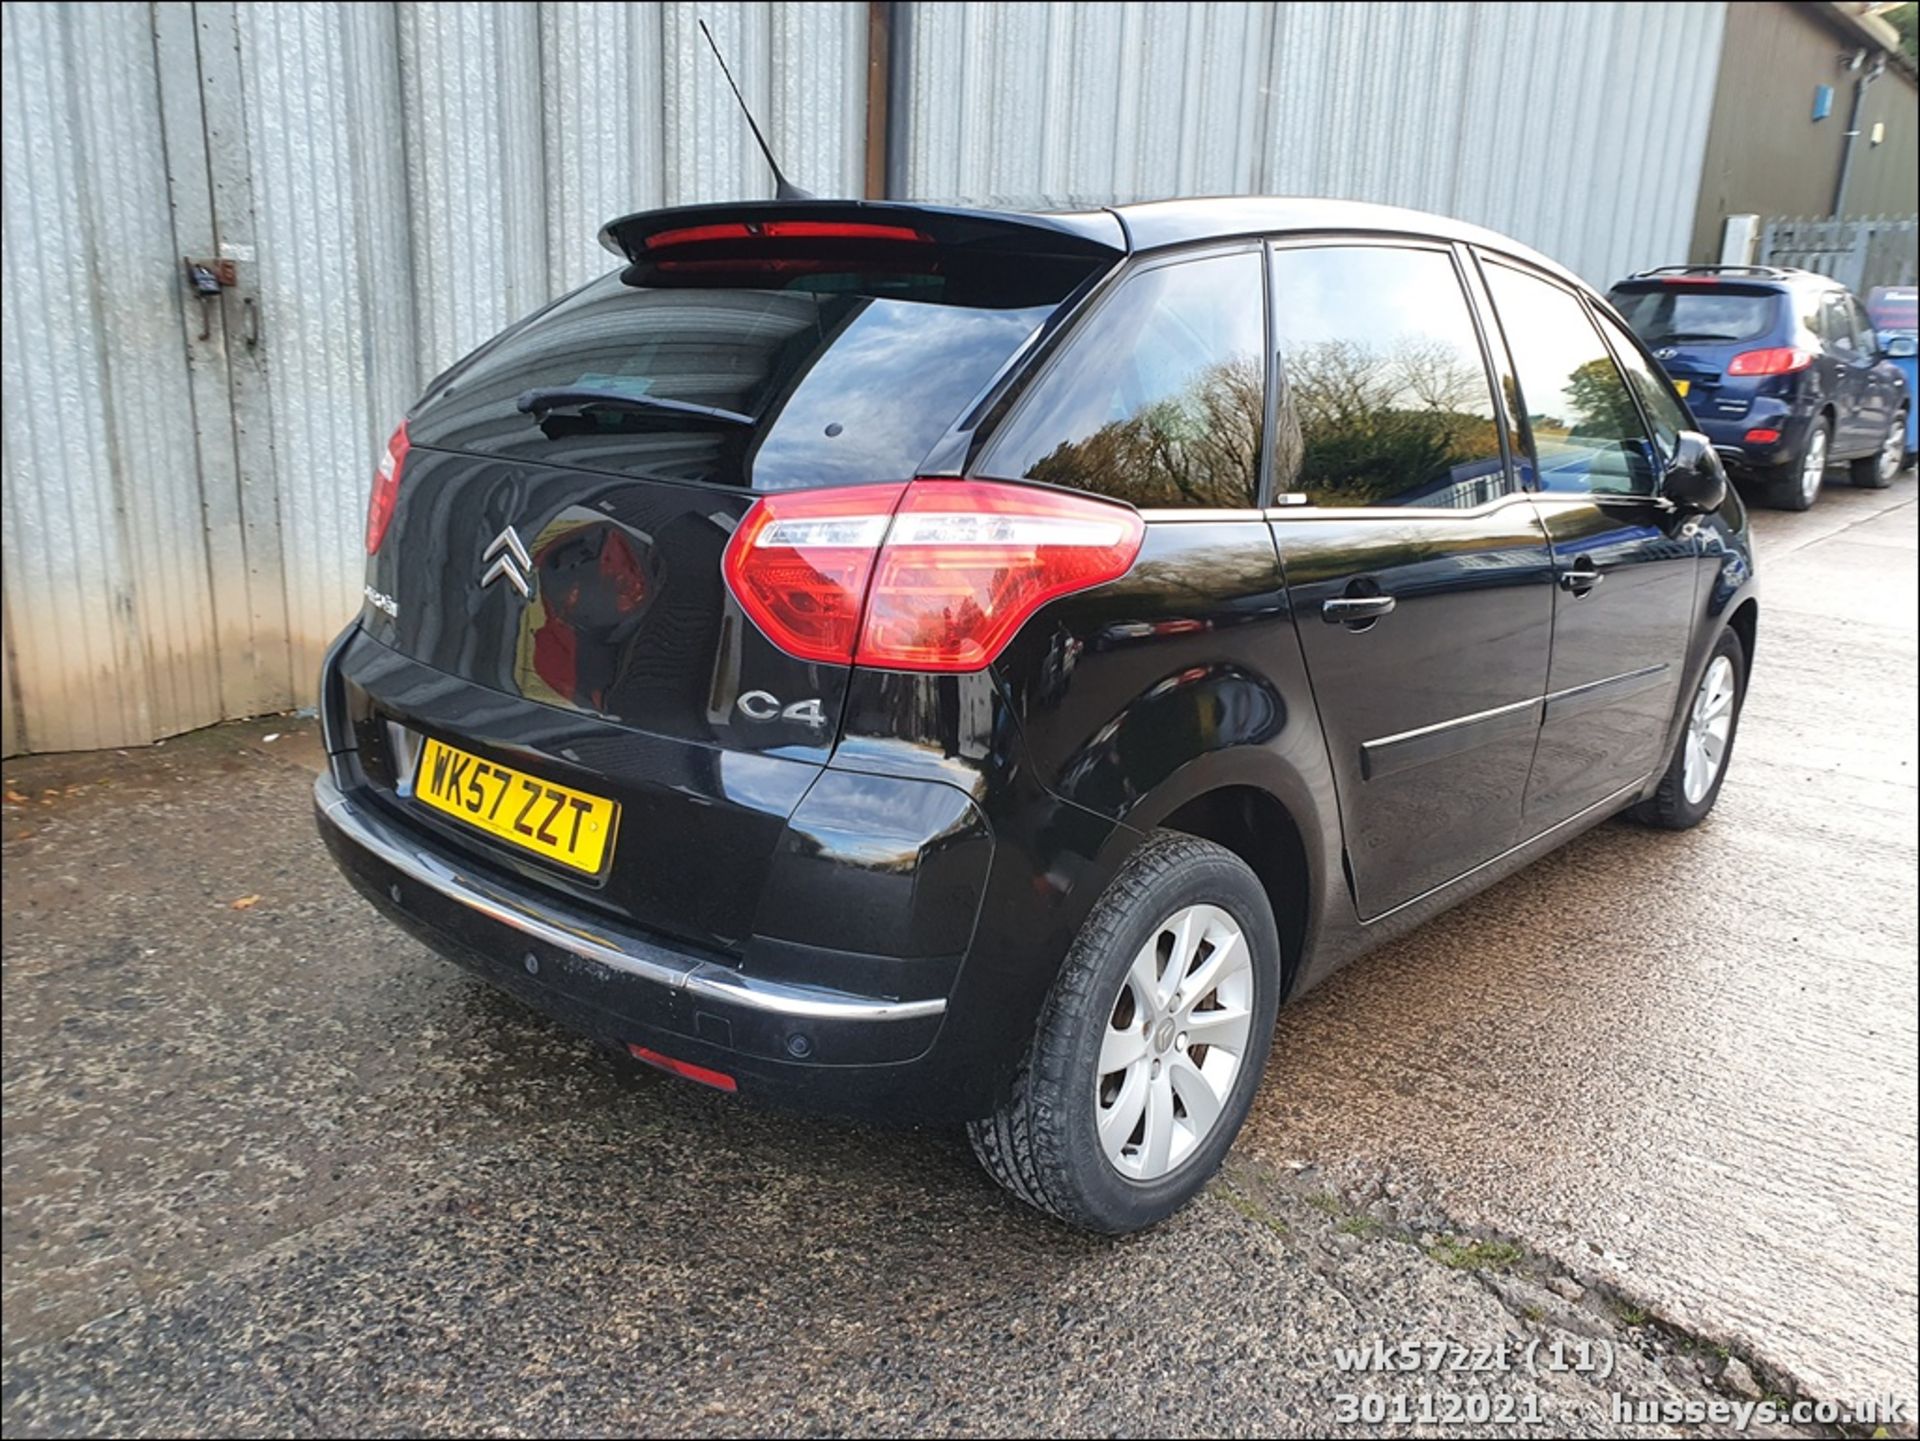 07/57 CITROEN C4 PICASSO 5 EXCL HDI EGS - 1560cc 5dr MPV (Black, 120k) - Image 11 of 29